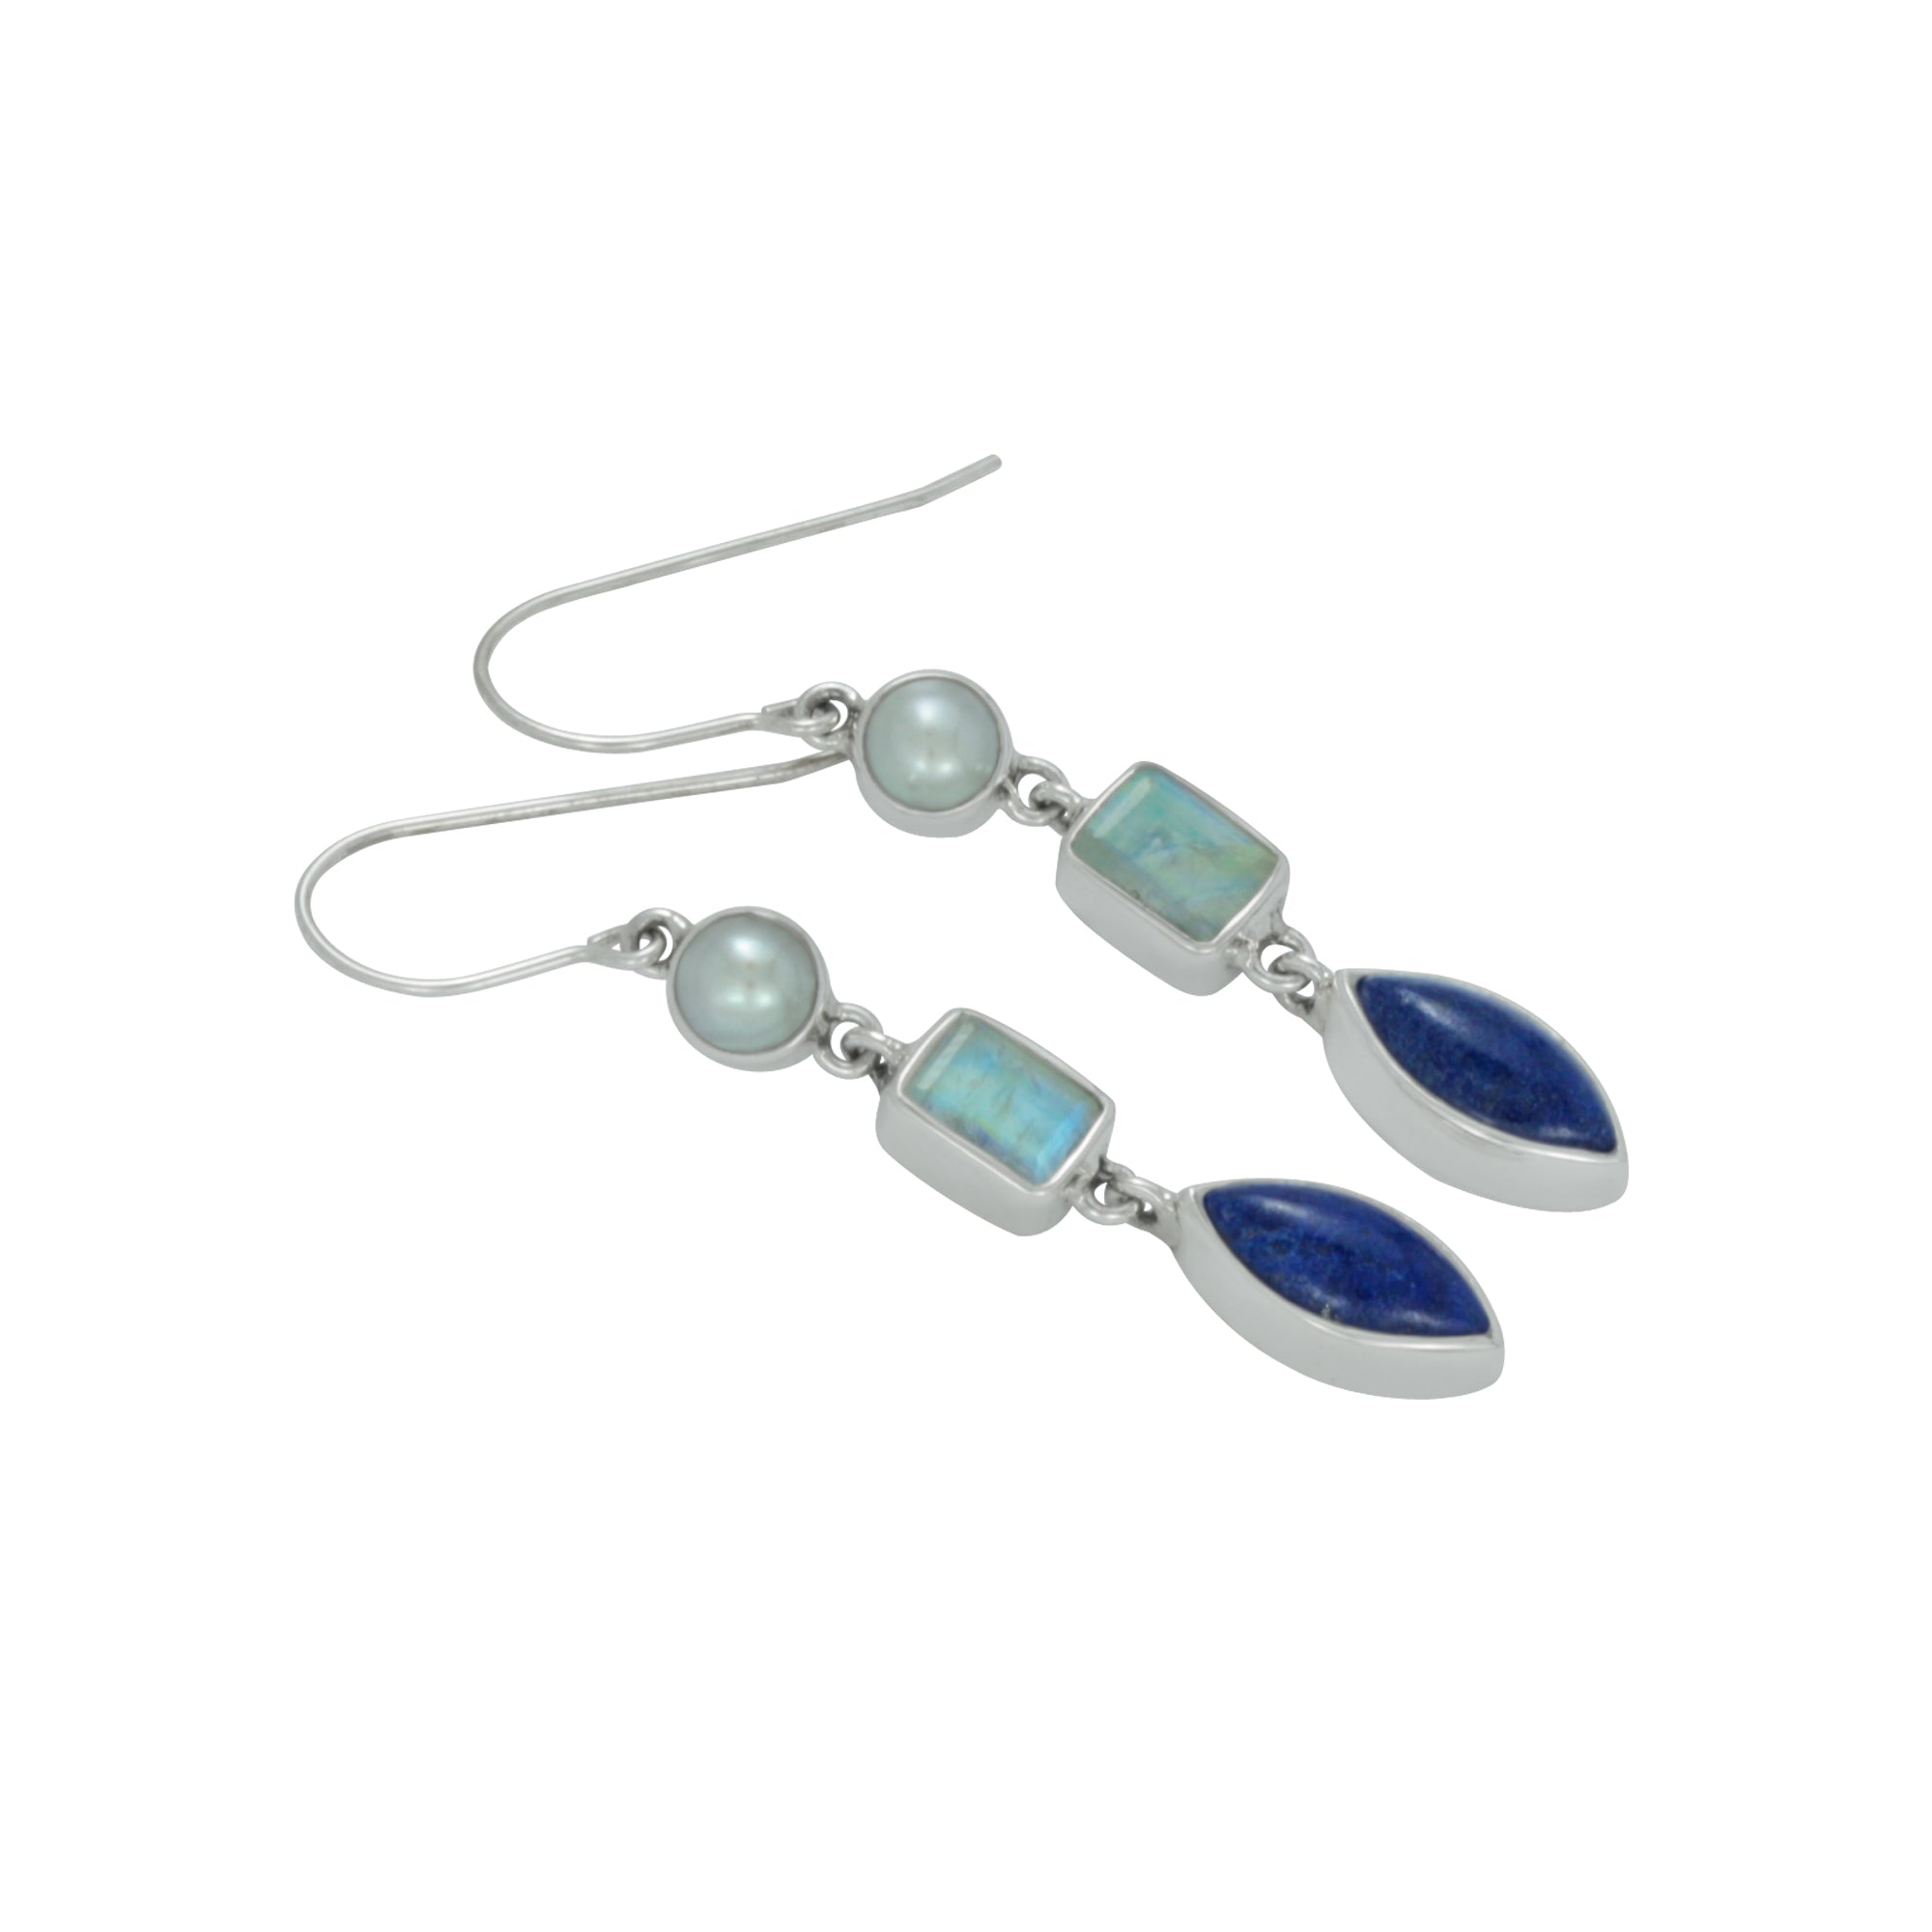 Stunning and Elegant Rainbow Moonstone pearl and lapis silver earring